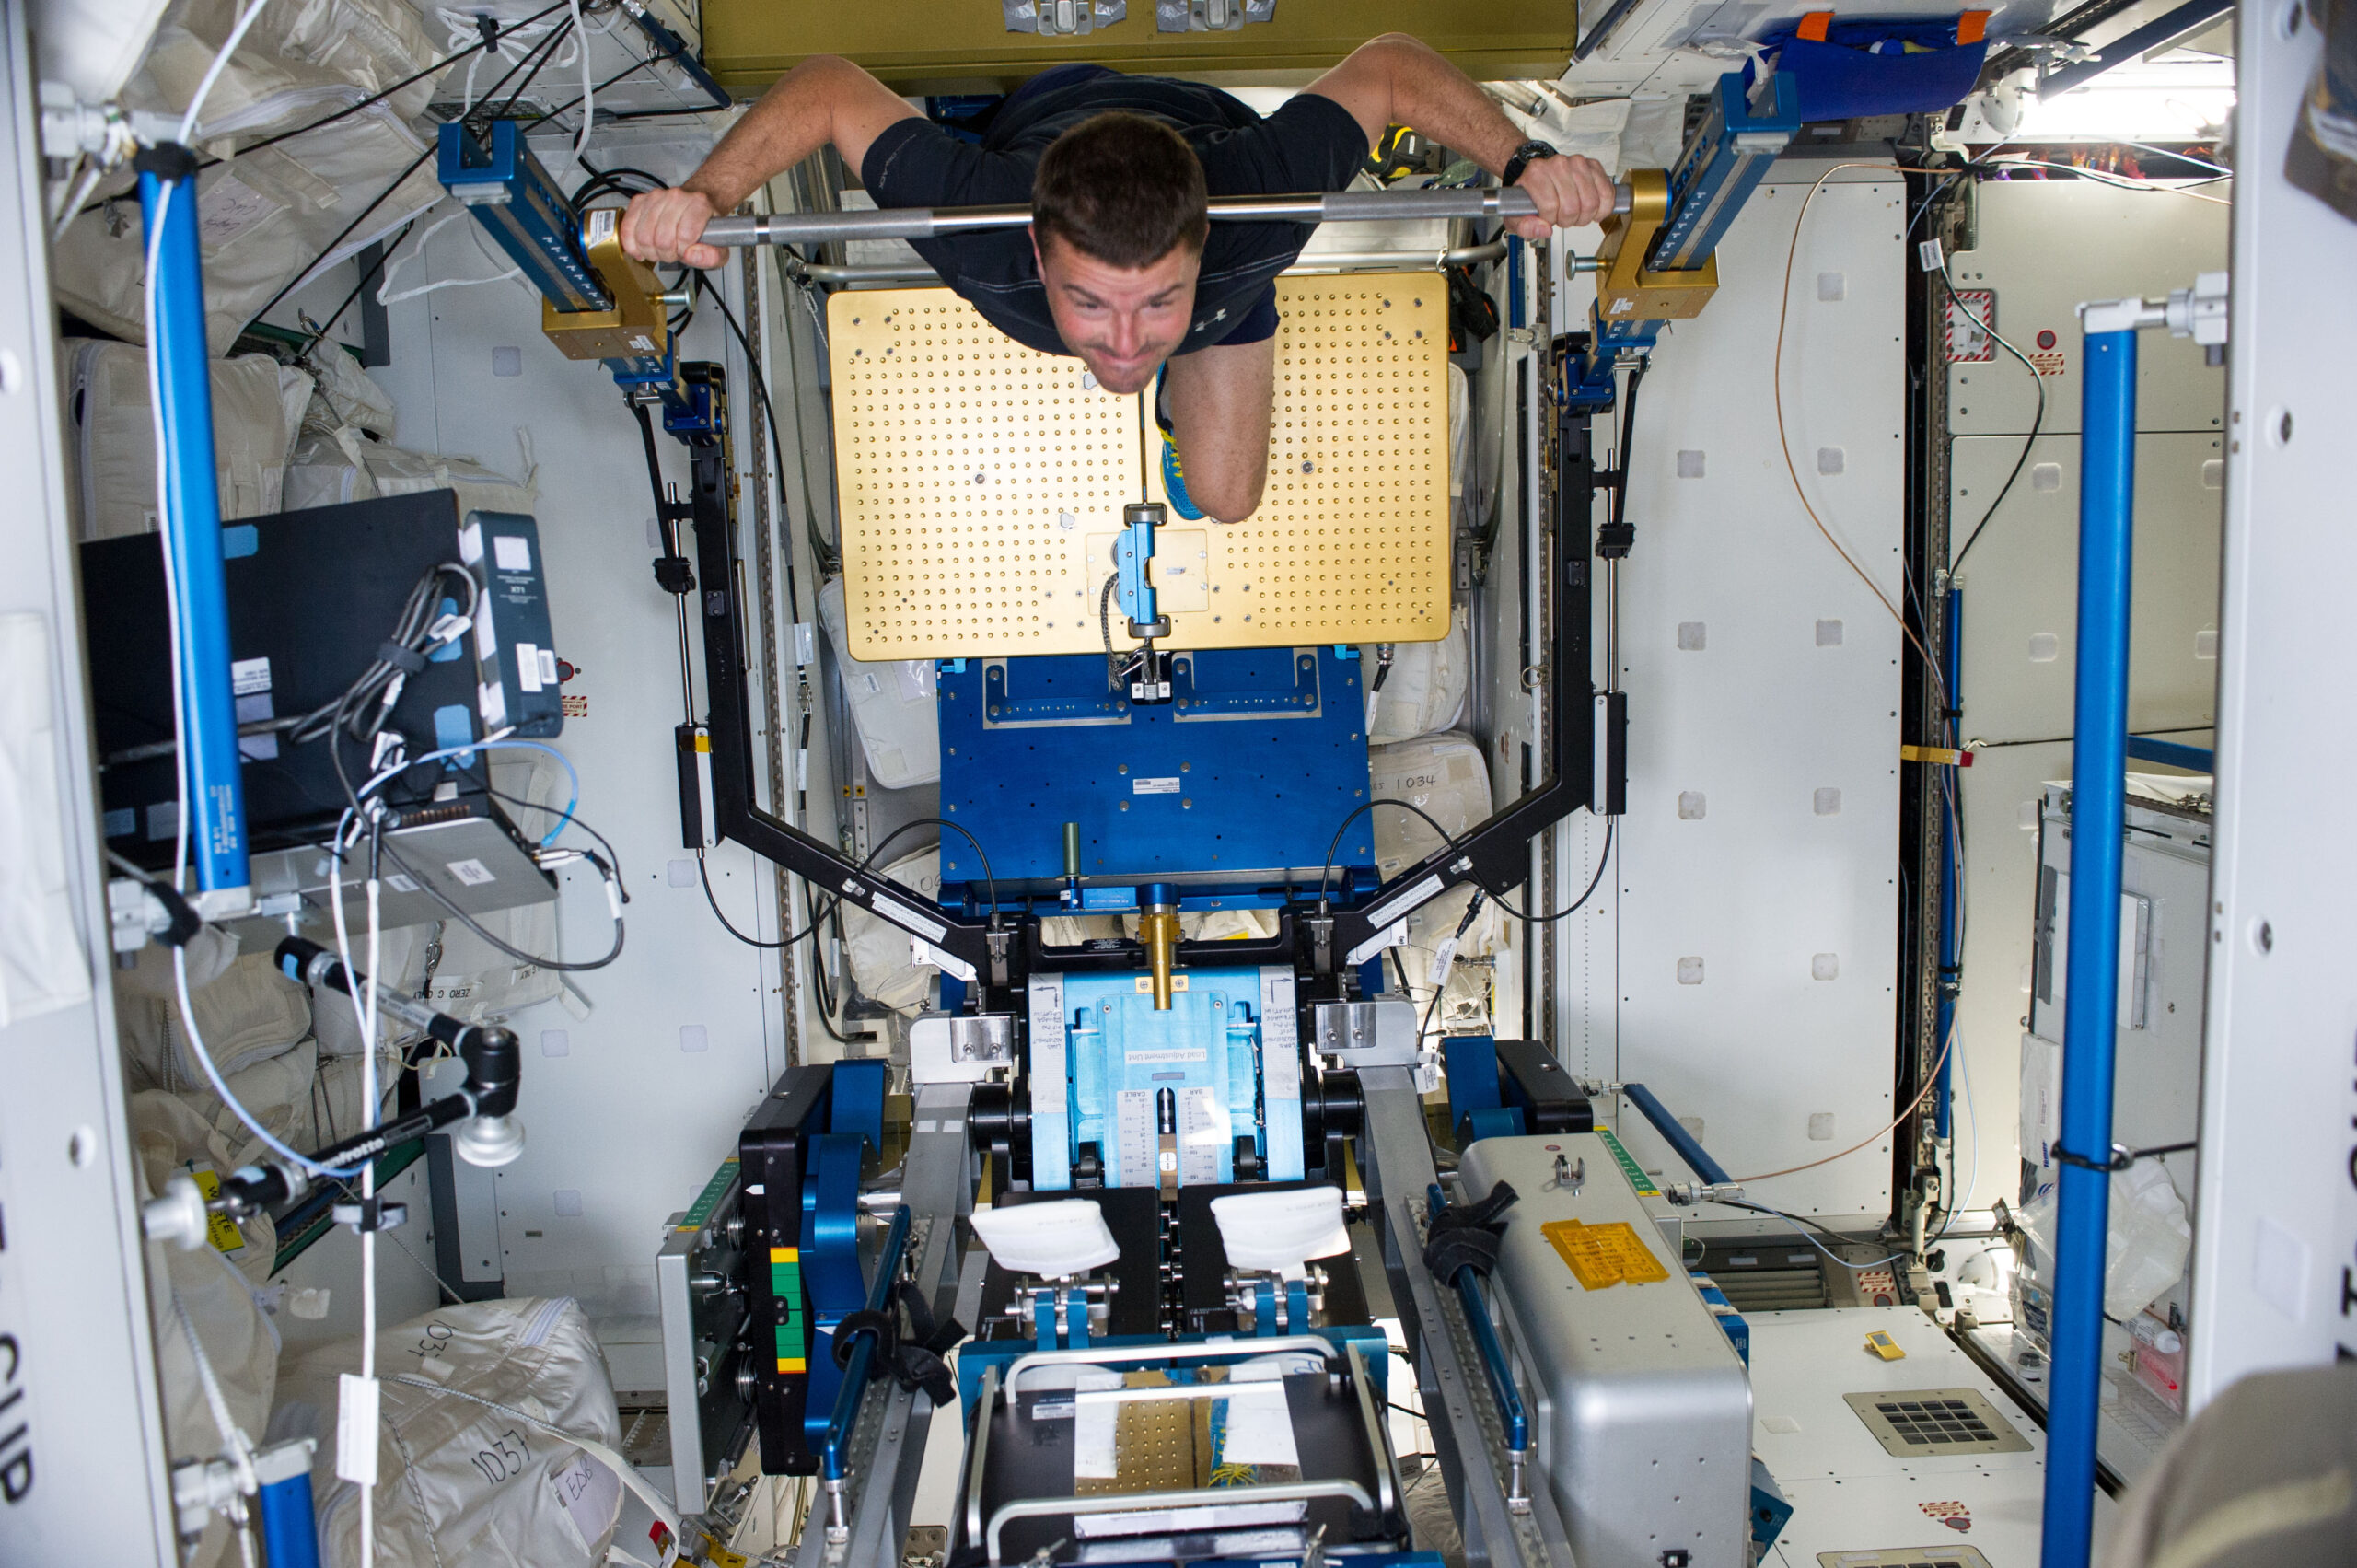 An astronaut uses the ARED machine on the International Space Station.